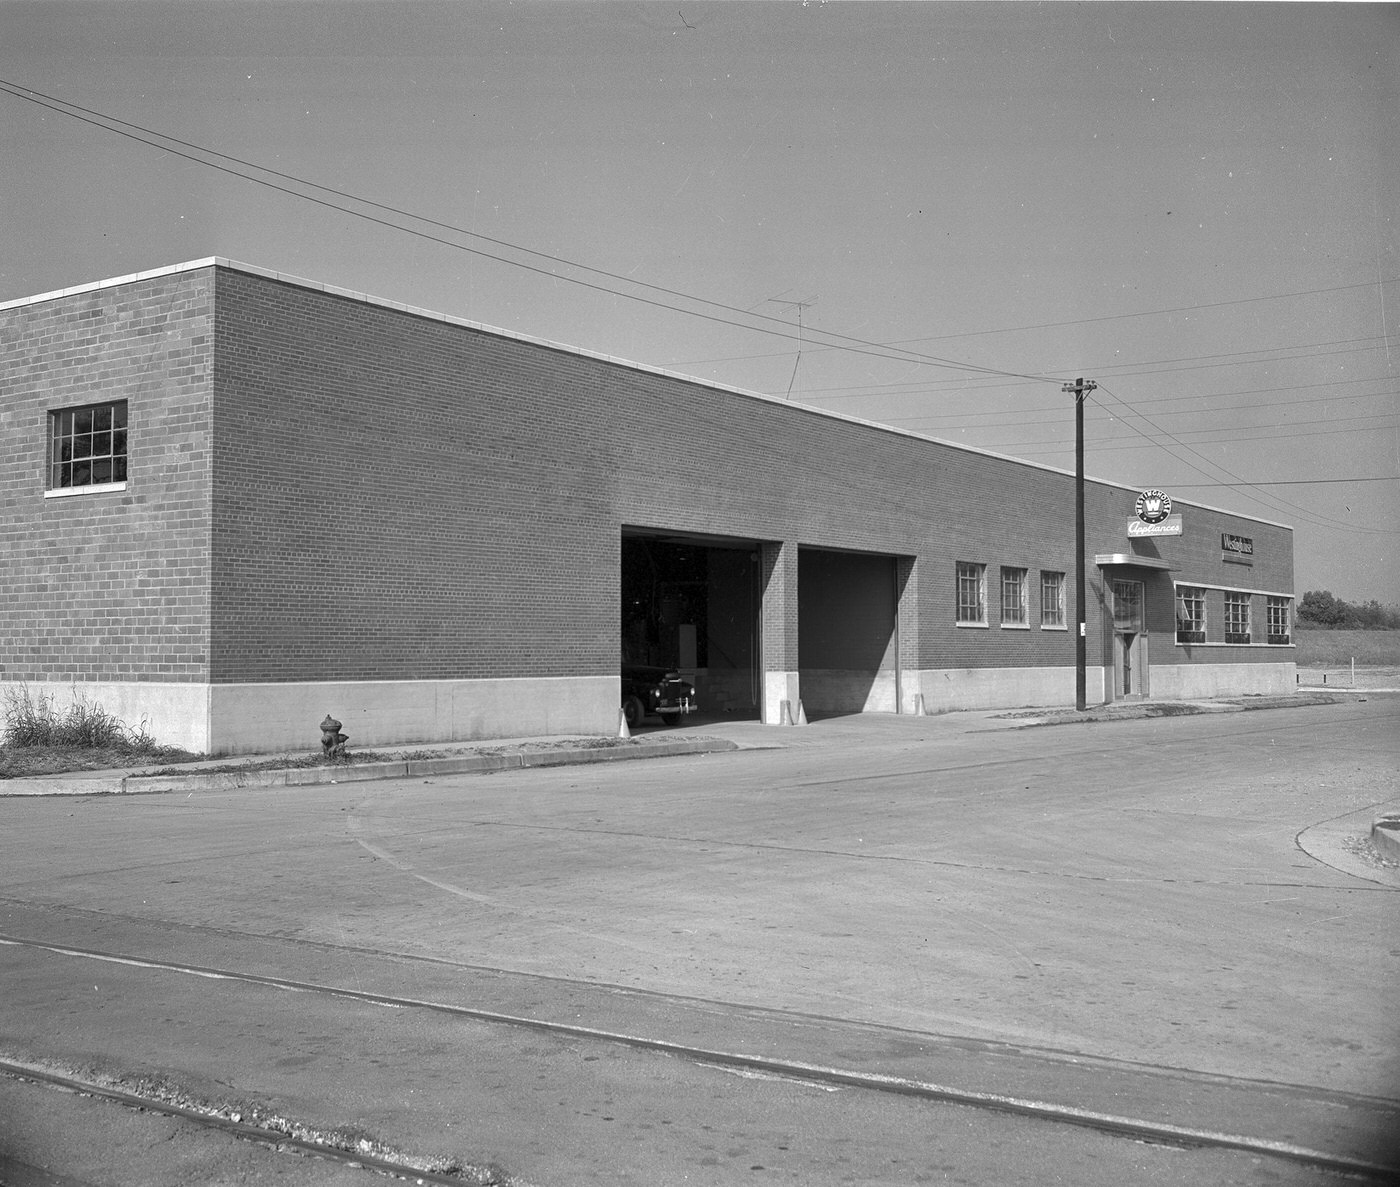 Westinghouse Electric Supply Company branch office at 205 N.E. 7th Street, Fort Worth, 148